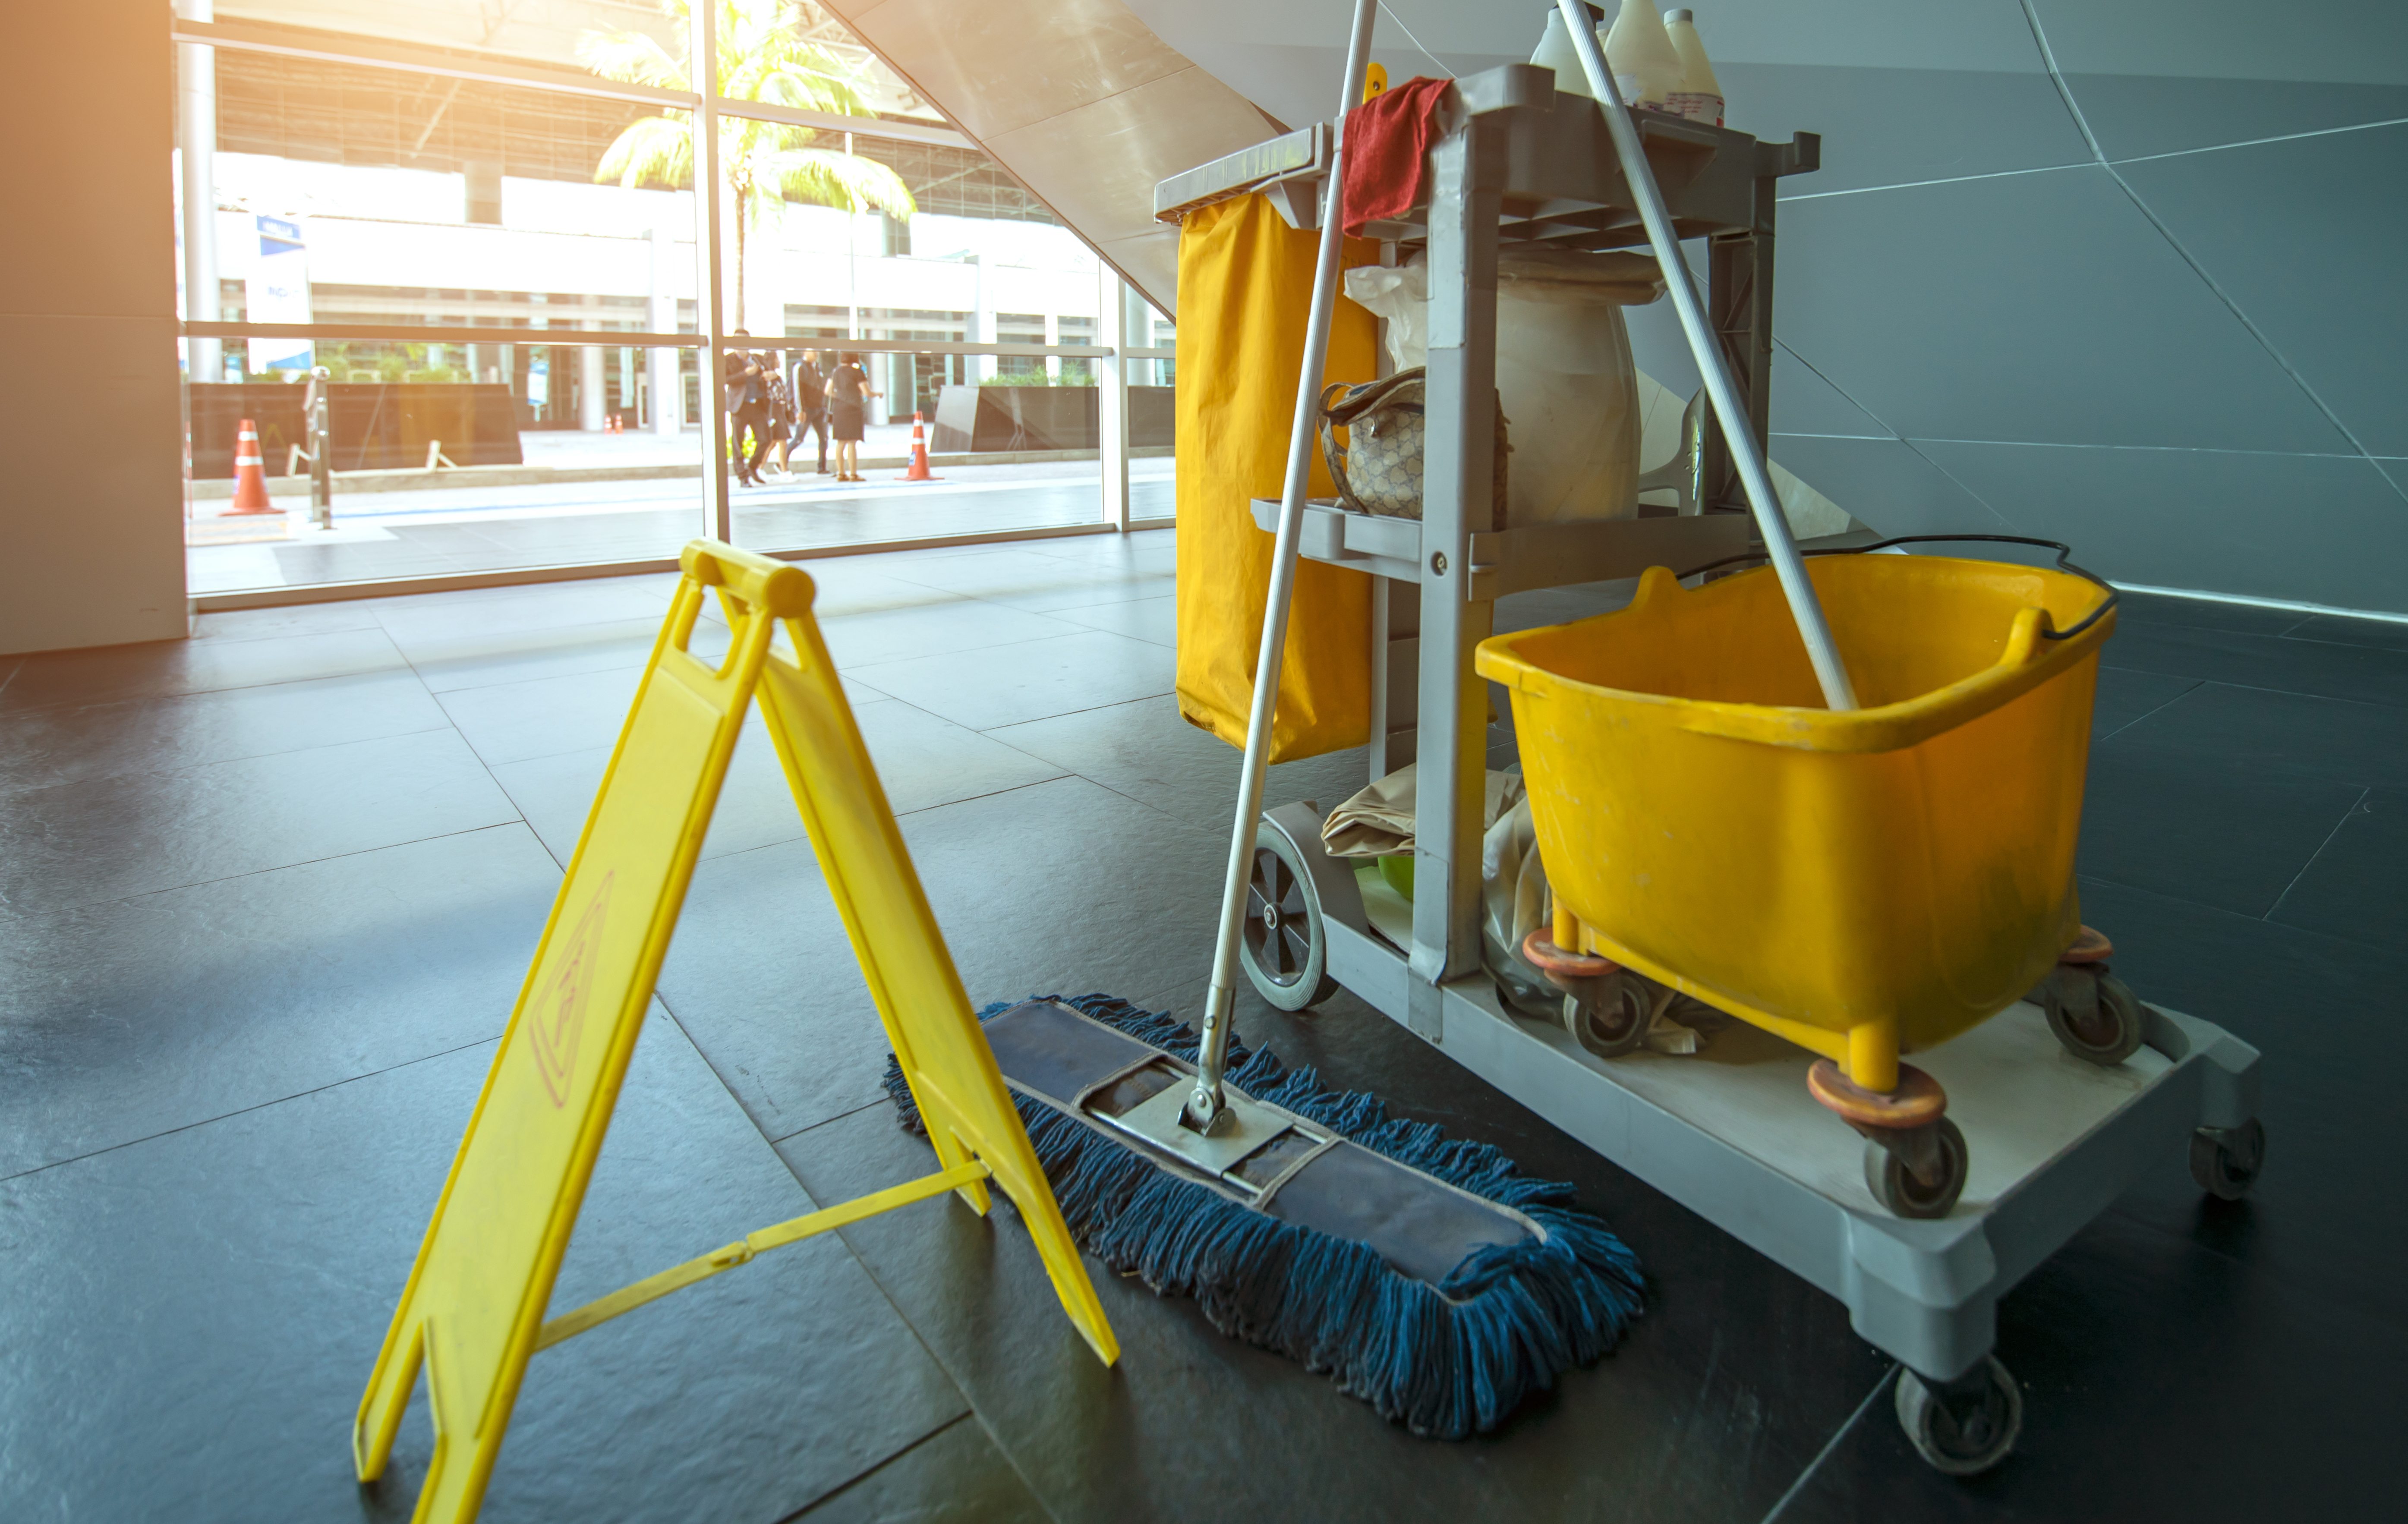 Janitor Cleaning Equipment | Source: Getty Images